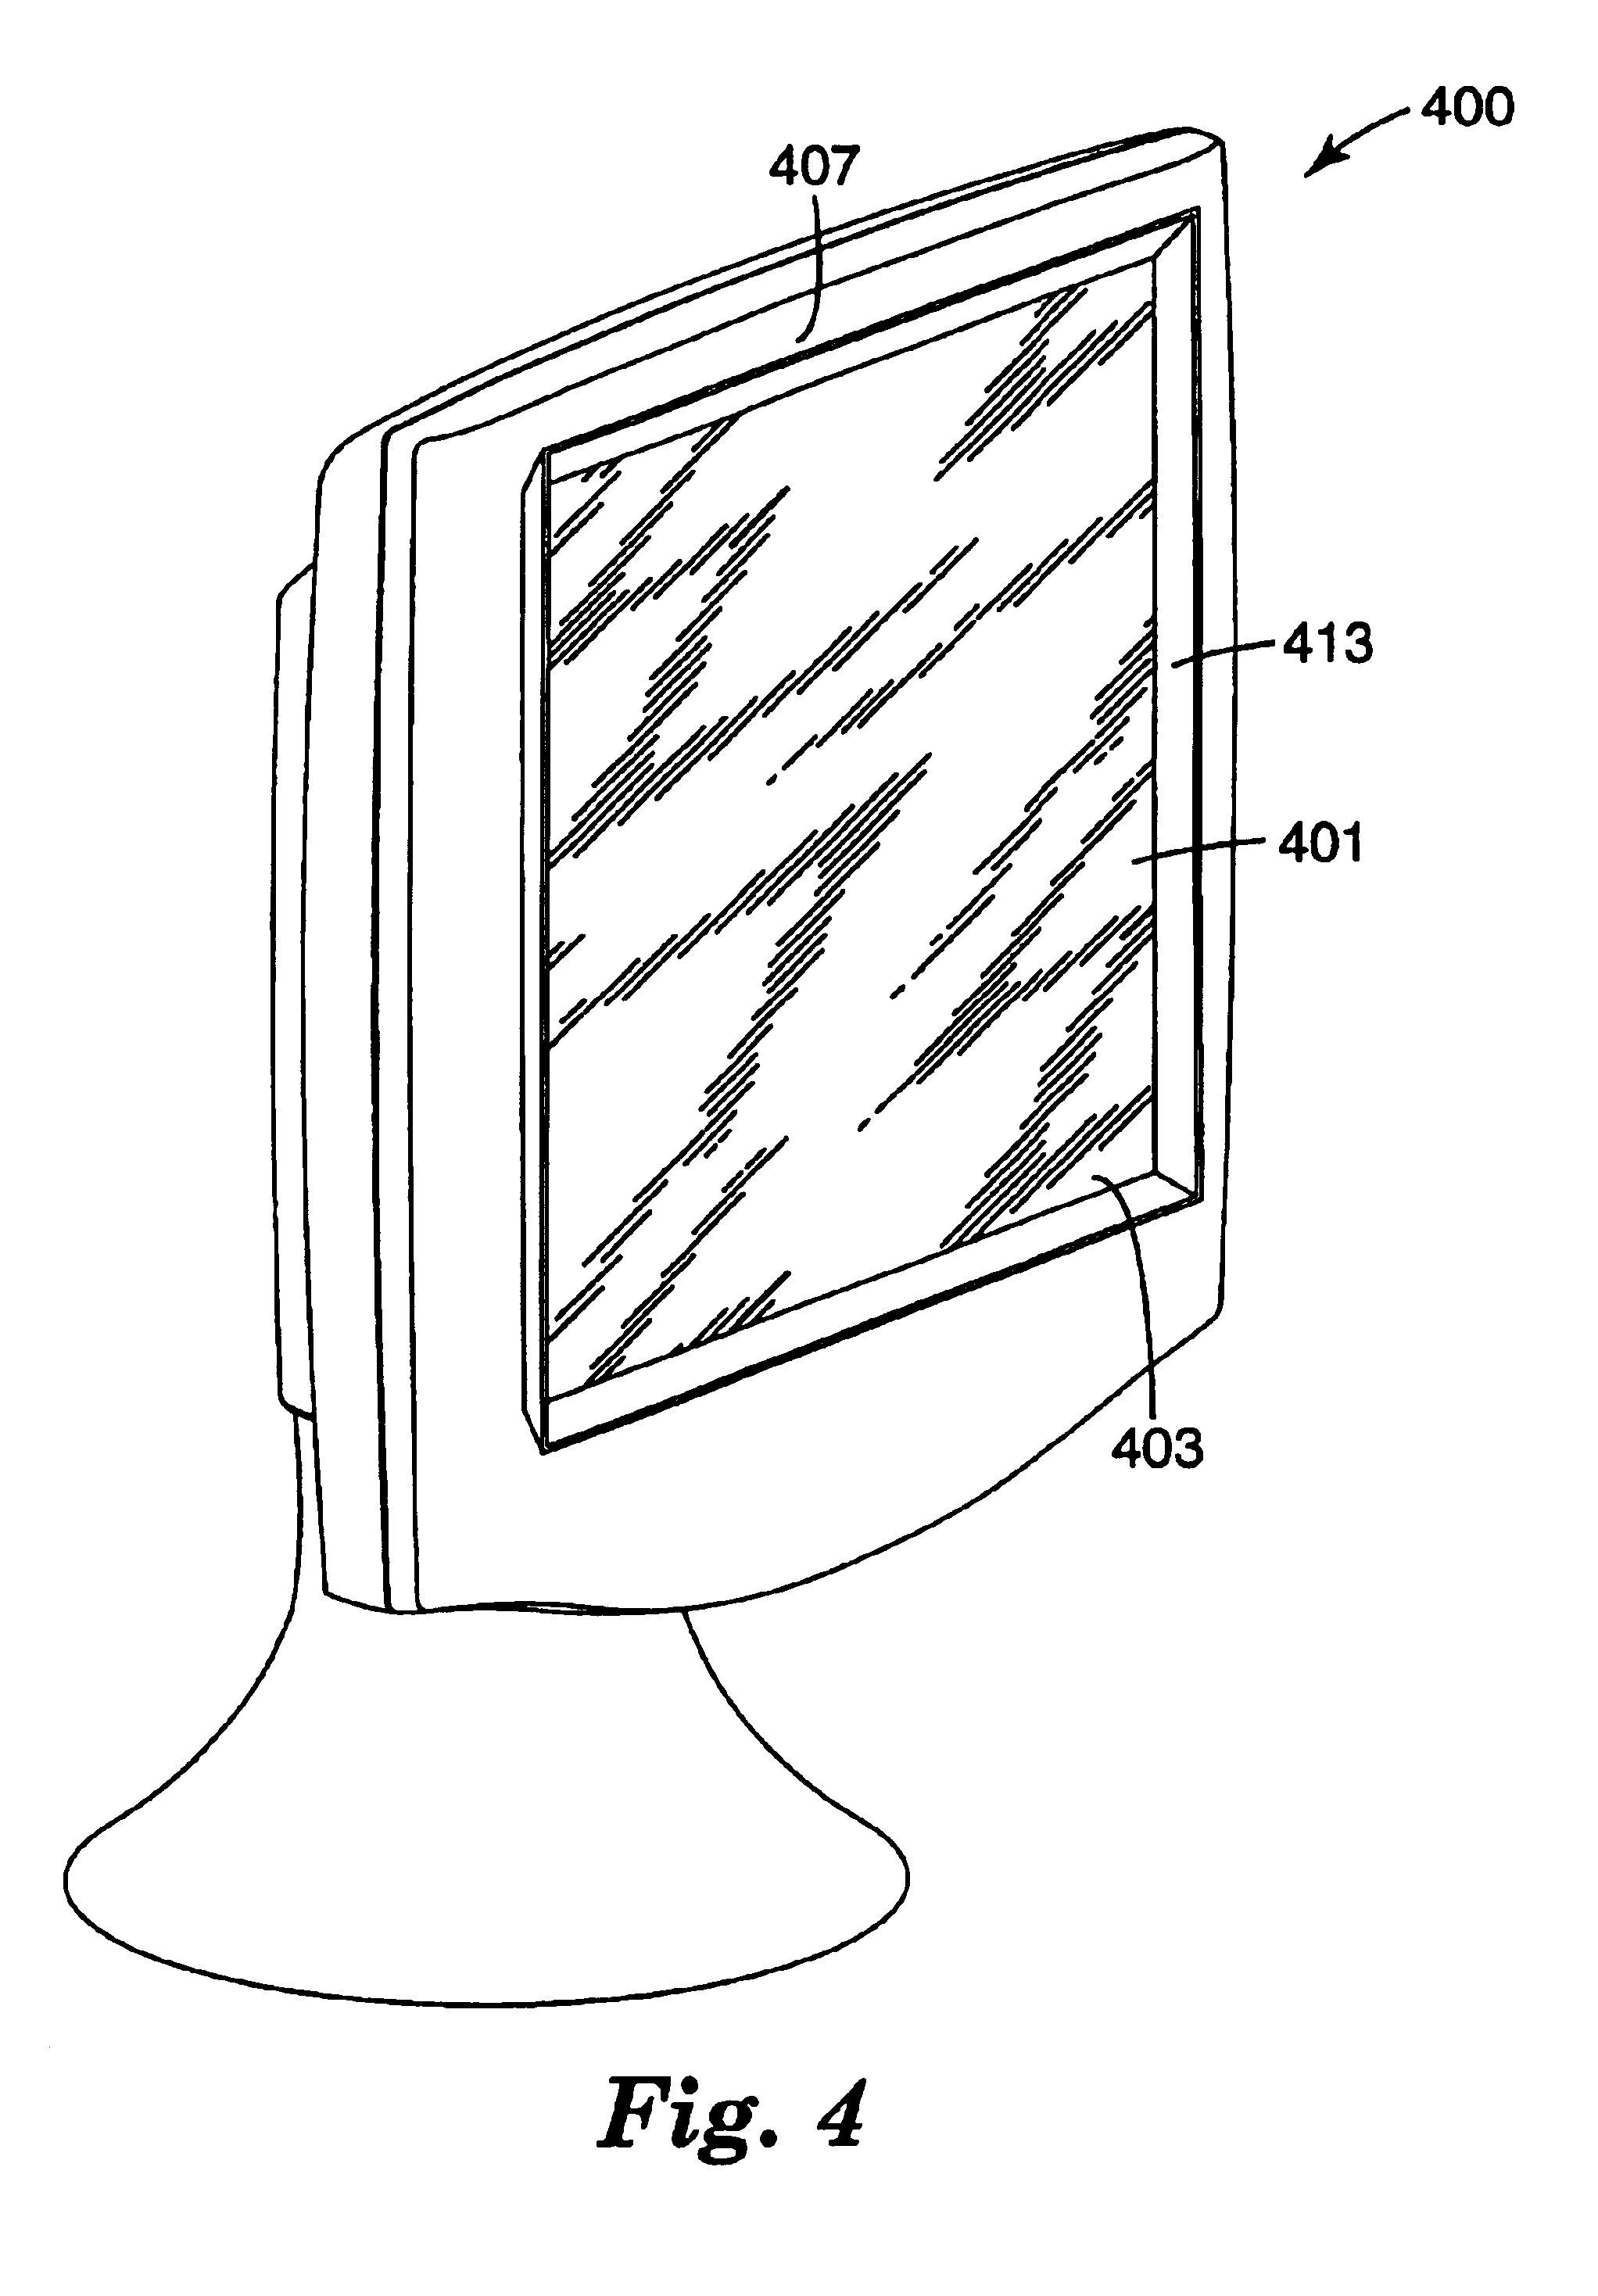 Moisture deflector for capacitive NFI touch screens for use with bezels of conductive material